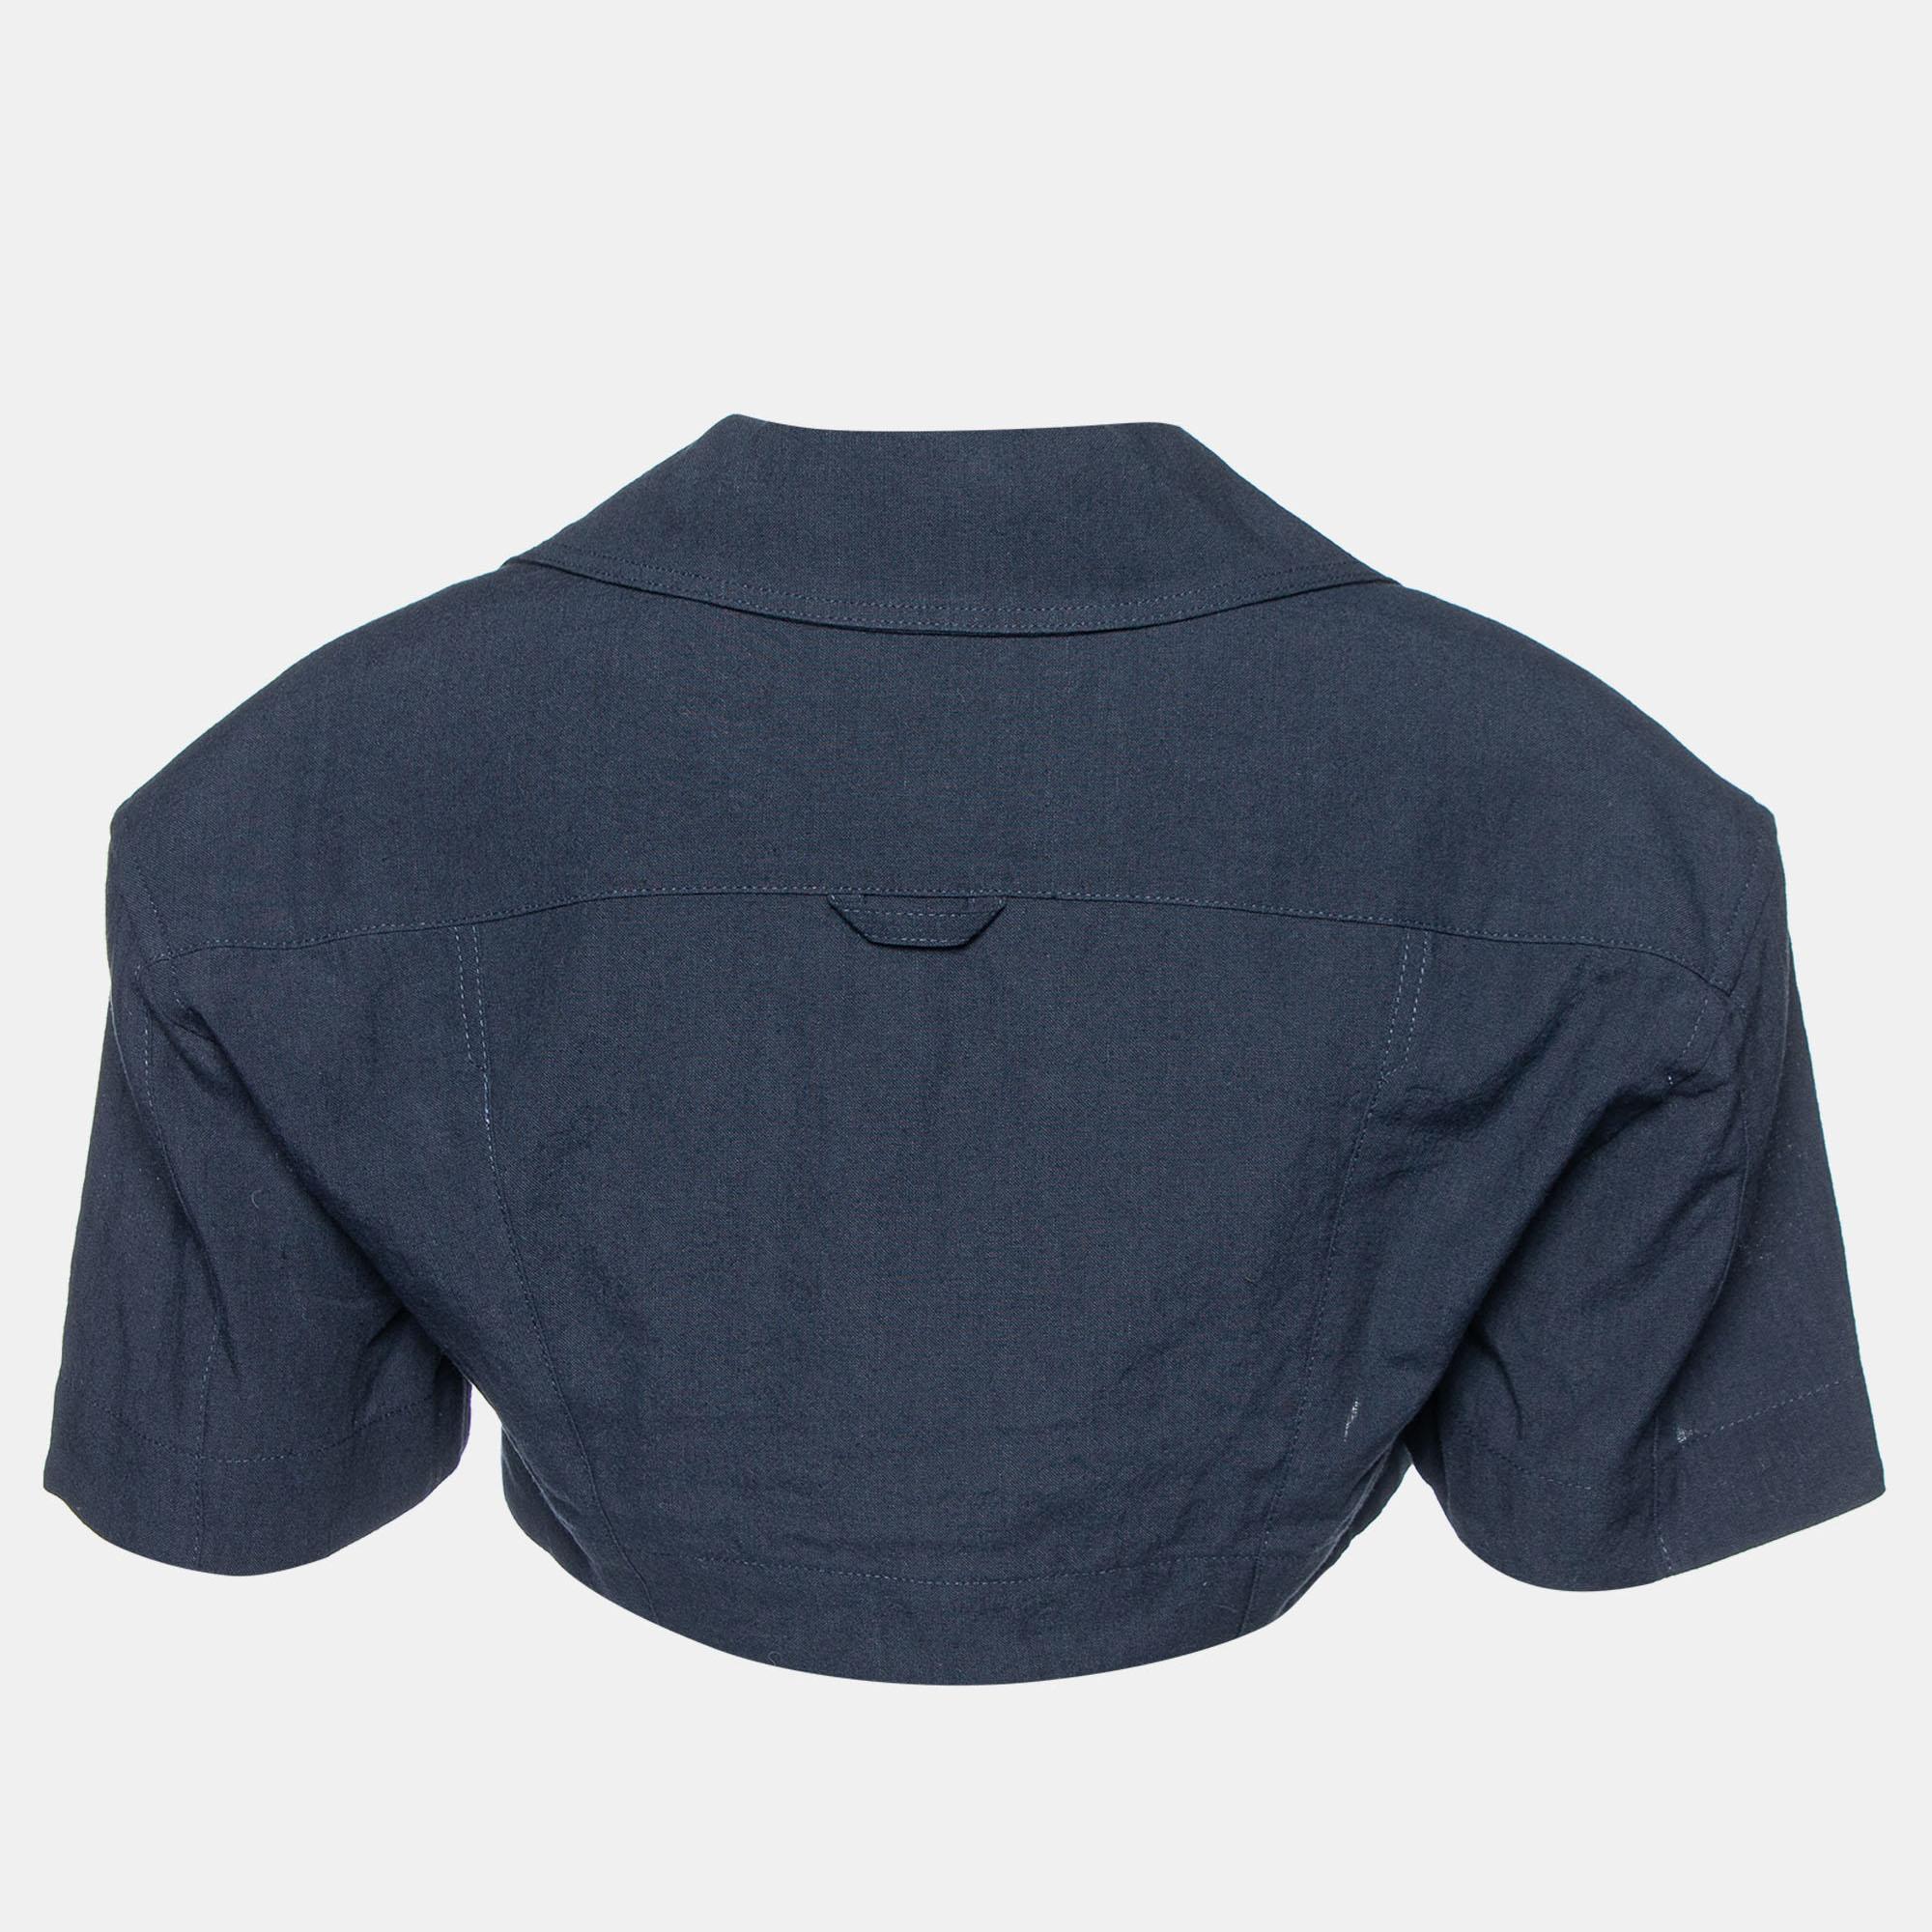 Crafted with a blend of linen and cotton, the Jacquemus Le Haut Bebi Crop Top exudes effortless charm. Its minimalist design features a flattering crop length, perfect for warm days. The rich navy hue adds depth, while the quality fabric ensures